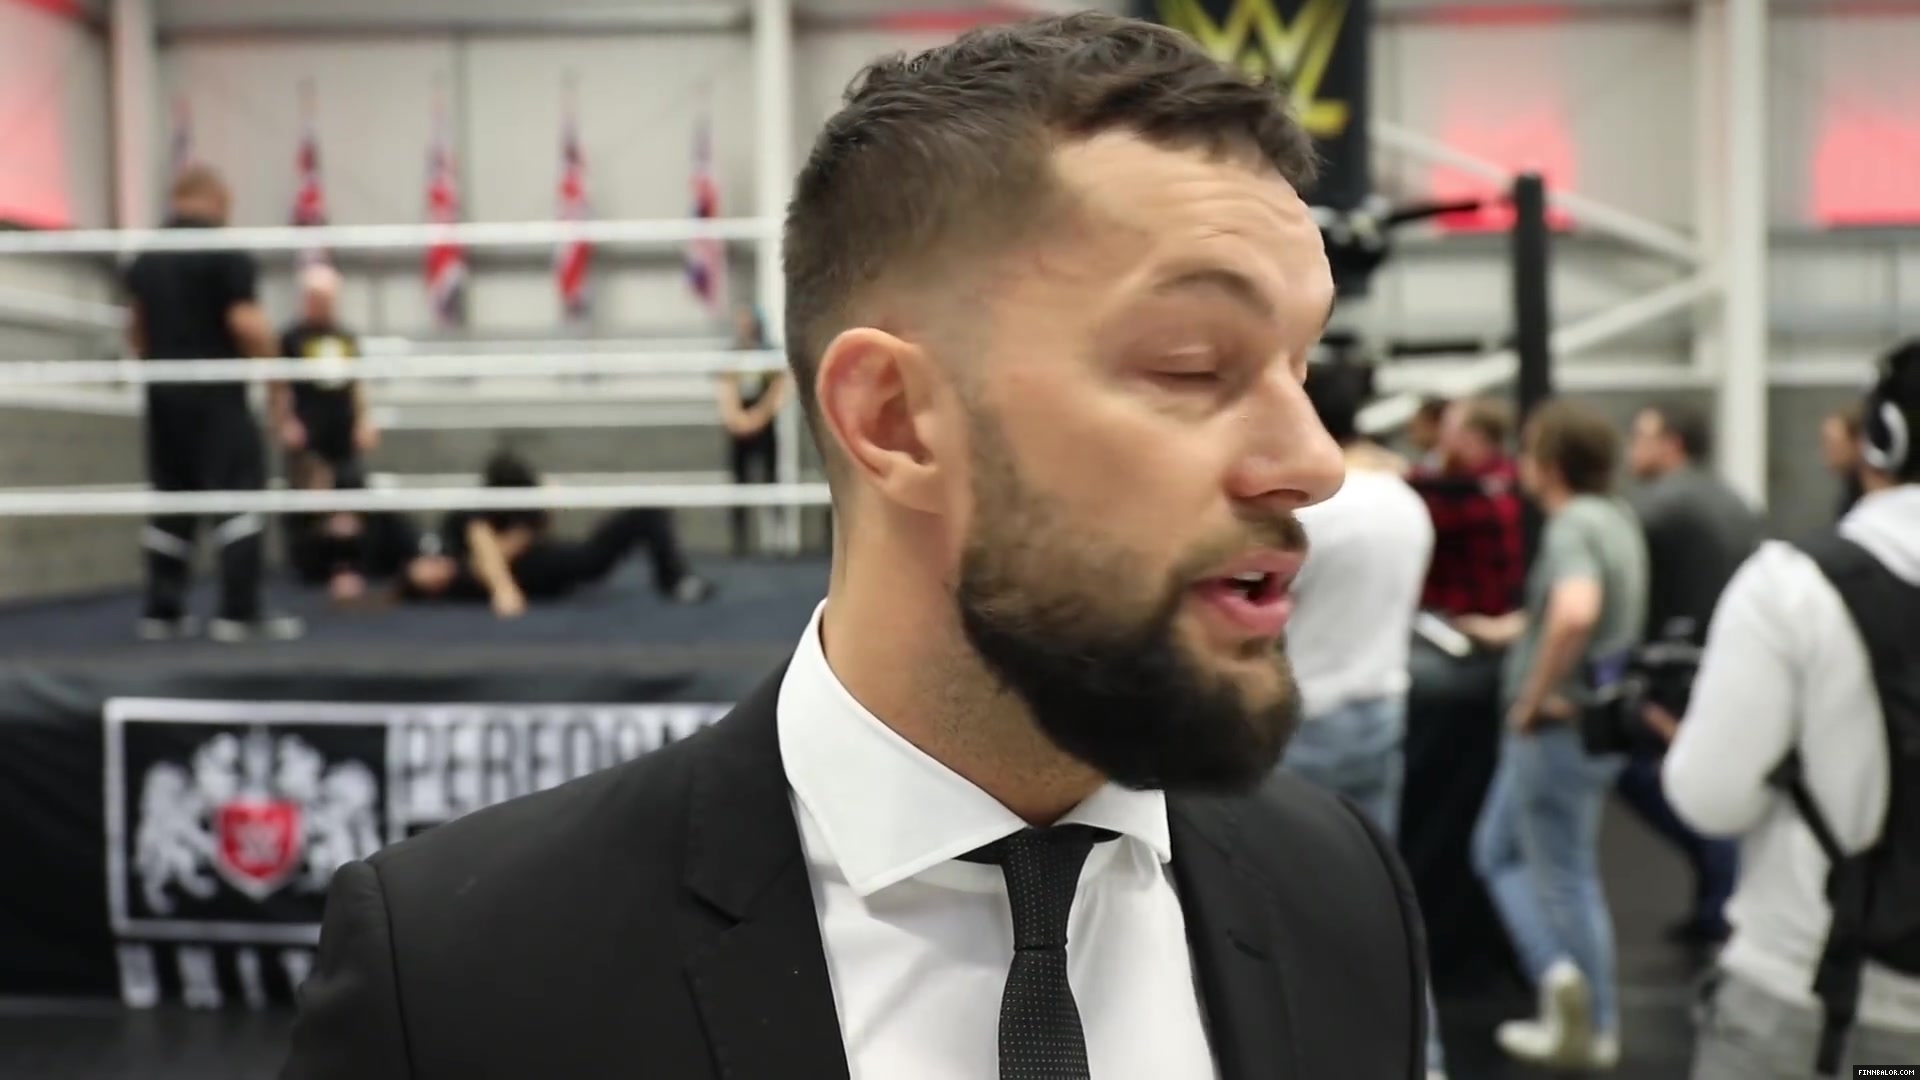 WWE_Superstar_FINN_BALOR_joins_MOUSTACHE_MOUNTAIN_at_the_opening_of_the_NXT_UK_PC_149.jpg